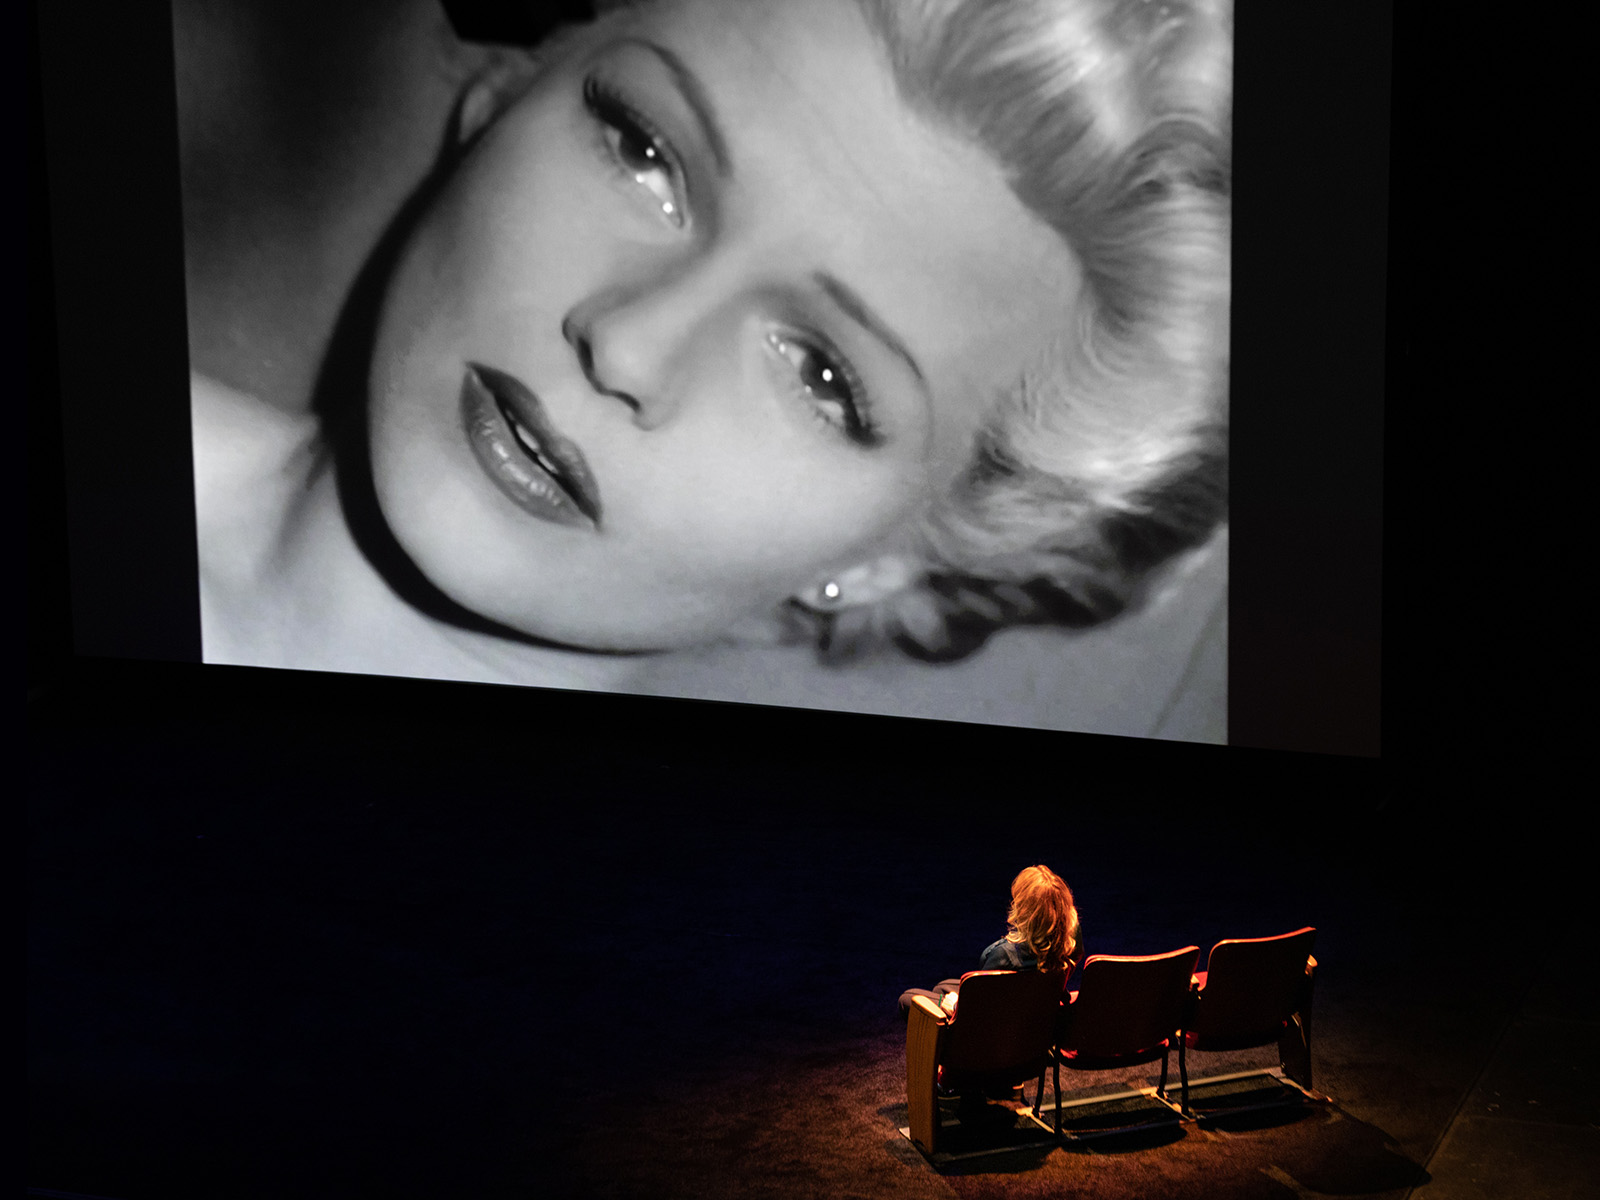 Observing gendered lighting on Rita Hayworth in The Lady from Shanghai.